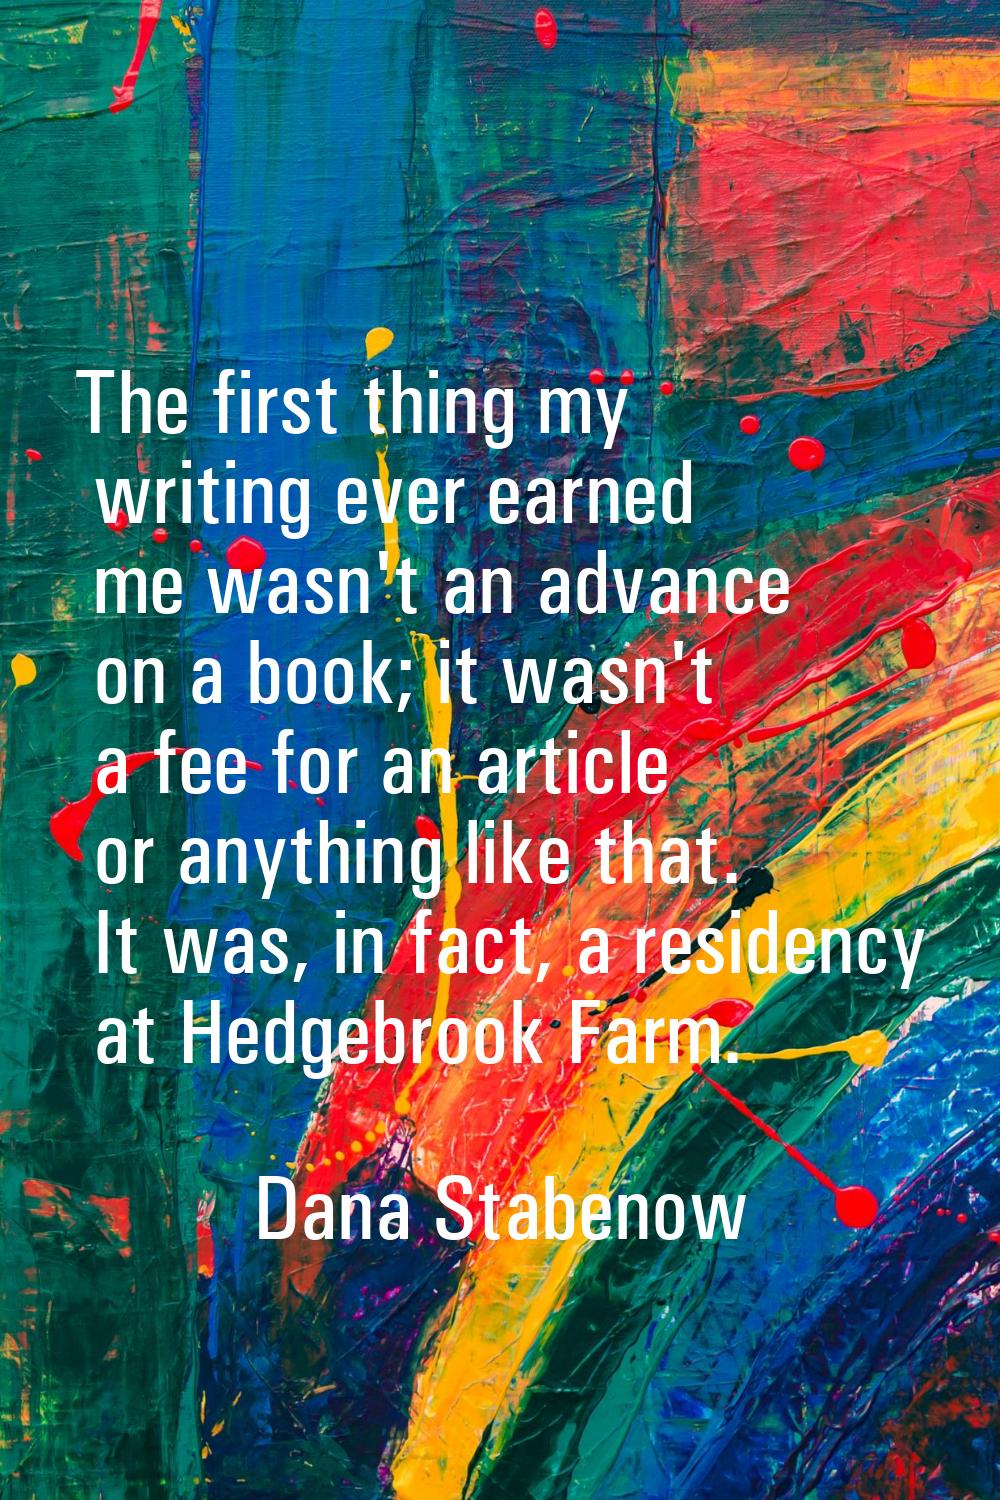 The first thing my writing ever earned me wasn't an advance on a book; it wasn't a fee for an artic